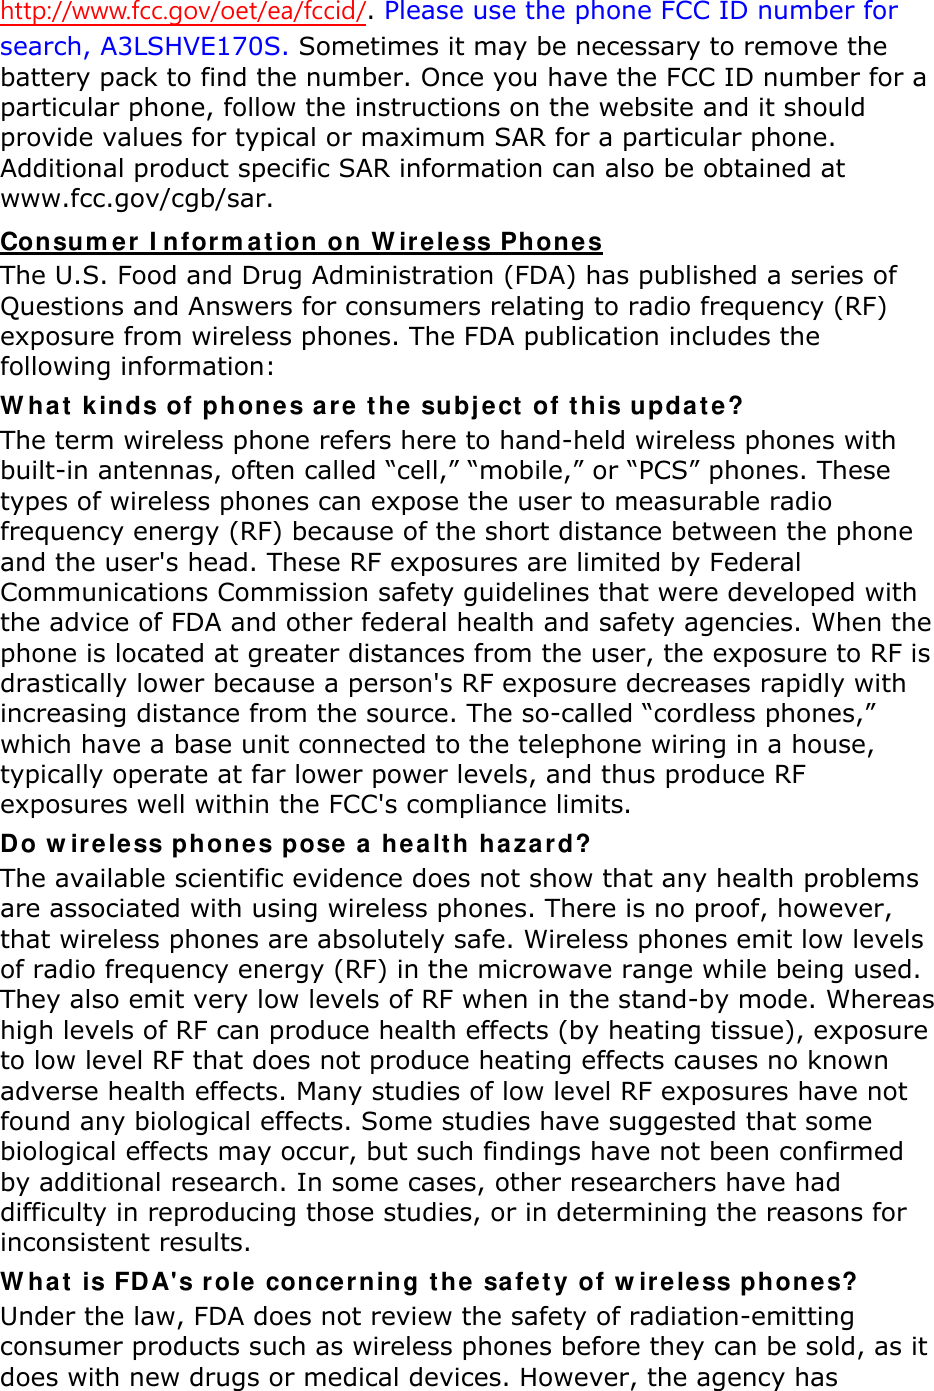 http://www.fcc.gov/oet/ea/fccid/. Please use the phone FCC ID number for search, A3LSHVE170S. Sometimes it may be necessary to remove the battery pack to find the number. Once you have the FCC ID number for a particular phone, follow the instructions on the website and it should provide values for typical or maximum SAR for a particular phone. Additional product specific SAR information can also be obtained at www.fcc.gov/cgb/sar. Consumer Information on Wireless Phones The U.S. Food and Drug Administration (FDA) has published a series of Questions and Answers for consumers relating to radio frequency (RF) exposure from wireless phones. The FDA publication includes the following information: What kinds of phones are the subject of this update? The term wireless phone refers here to hand-held wireless phones with built-in antennas, often called “cell,” “mobile,” or “PCS” phones. These types of wireless phones can expose the user to measurable radio frequency energy (RF) because of the short distance between the phone and the user&apos;s head. These RF exposures are limited by Federal Communications Commission safety guidelines that were developed with the advice of FDA and other federal health and safety agencies. When the phone is located at greater distances from the user, the exposure to RF is drastically lower because a person&apos;s RF exposure decreases rapidly with increasing distance from the source. The so-called “cordless phones,” which have a base unit connected to the telephone wiring in a house, typically operate at far lower power levels, and thus produce RF exposures well within the FCC&apos;s compliance limits. Do wireless phones pose a health hazard? The available scientific evidence does not show that any health problems are associated with using wireless phones. There is no proof, however, that wireless phones are absolutely safe. Wireless phones emit low levels of radio frequency energy (RF) in the microwave range while being used. They also emit very low levels of RF when in the stand-by mode. Whereas high levels of RF can produce health effects (by heating tissue), exposure to low level RF that does not produce heating effects causes no known adverse health effects. Many studies of low level RF exposures have not found any biological effects. Some studies have suggested that some biological effects may occur, but such findings have not been confirmed by additional research. In some cases, other researchers have had difficulty in reproducing those studies, or in determining the reasons for inconsistent results. What is FDA&apos;s role concerning the safety of wireless phones? Under the law, FDA does not review the safety of radiation-emitting consumer products such as wireless phones before they can be sold, as it does with new drugs or medical devices. However, the agency has 